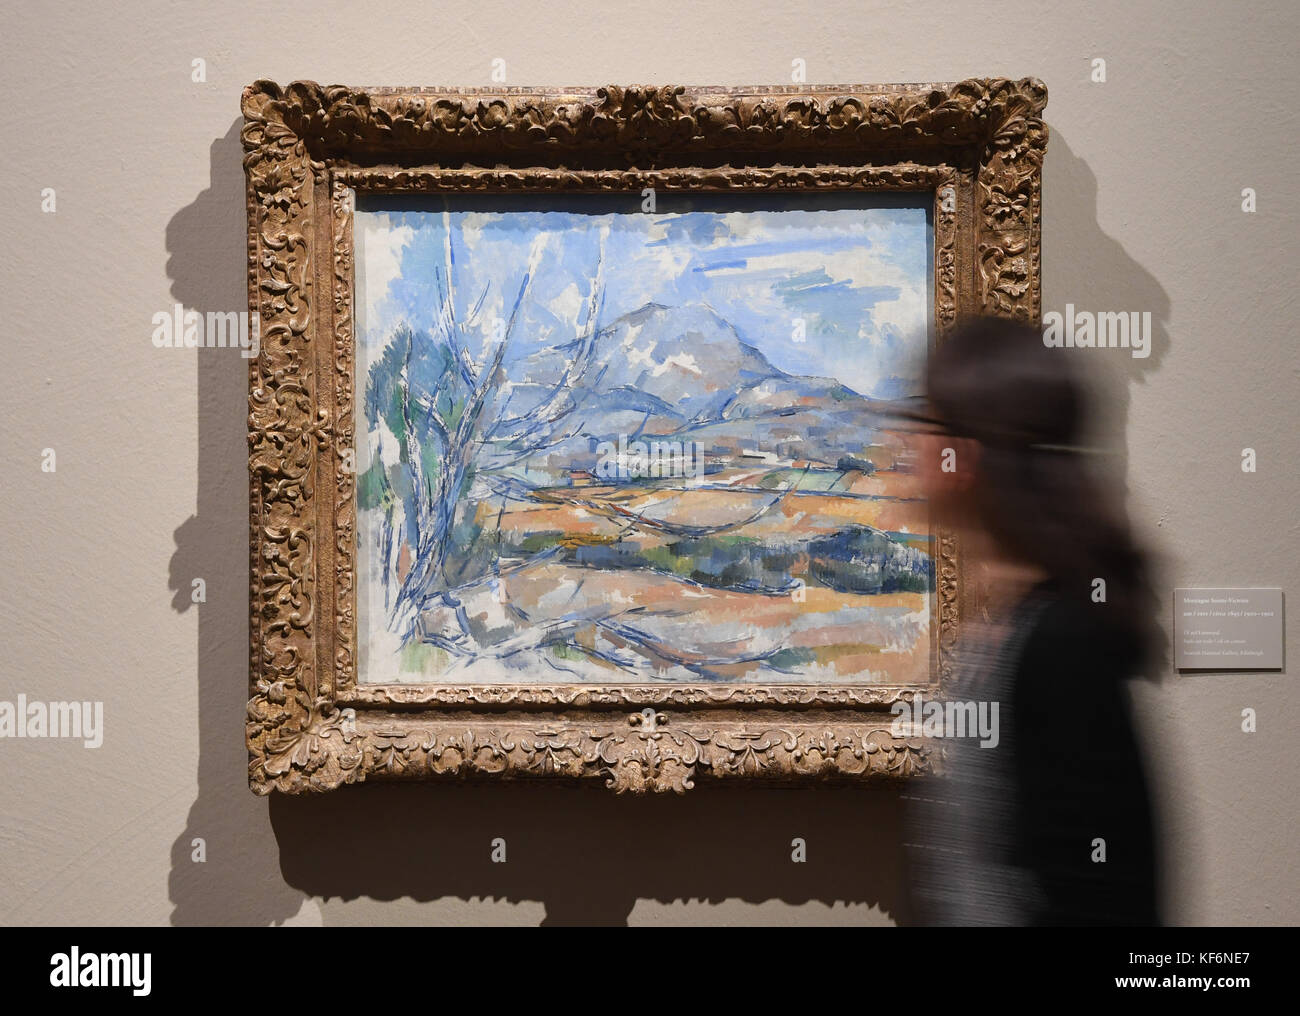 Karlsruhe, Germany. 25th Oct, 2017. The piece 'Montagne Sainte-Victoire' by Paul Cezanne, created 1895/1900-1902, being displayed in the State Art Gallery in Karlsruhe, Germany, 25 October 2017. The picture is part of the exhibition 'Cezanne.Metamorphoses', which will run between 28 October until 11 February 2018. Credit: Uli Deck/dpa/Alamy Live News Stock Photo